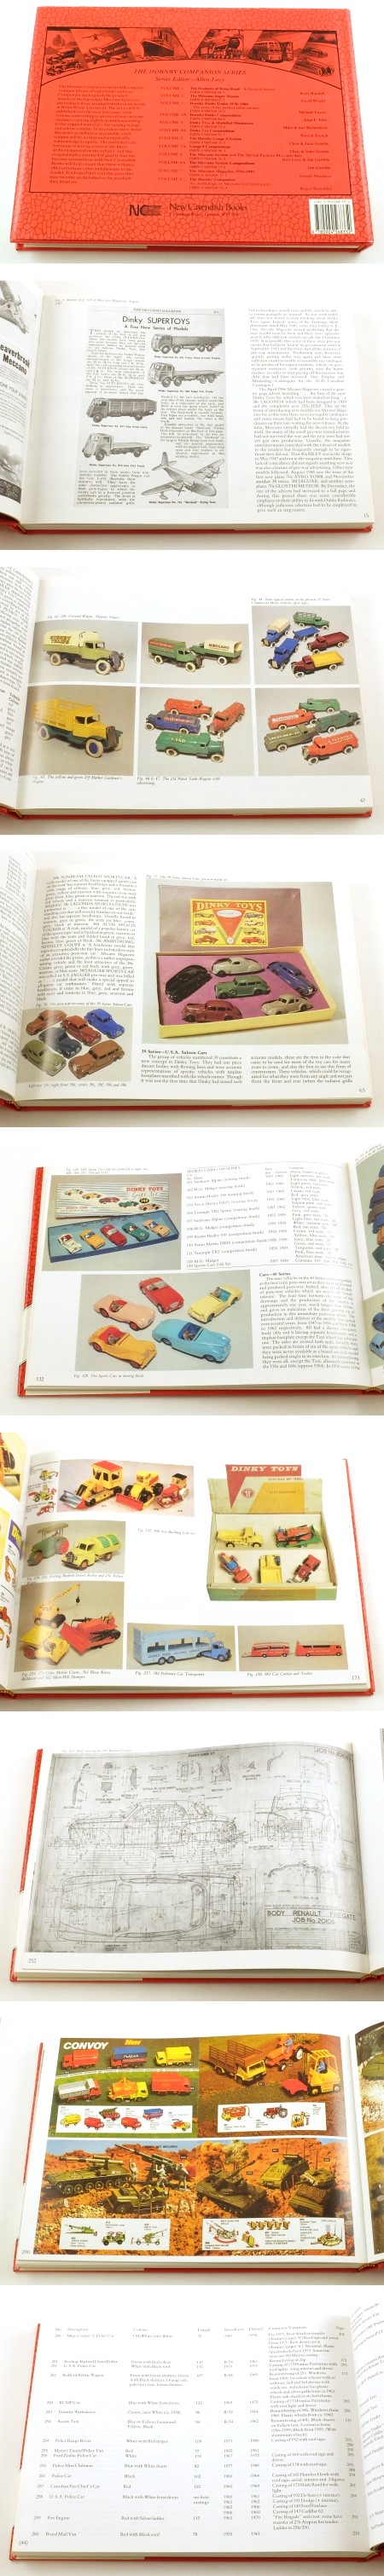 Dinky Toys and Modelled Miniatures 3rd edition